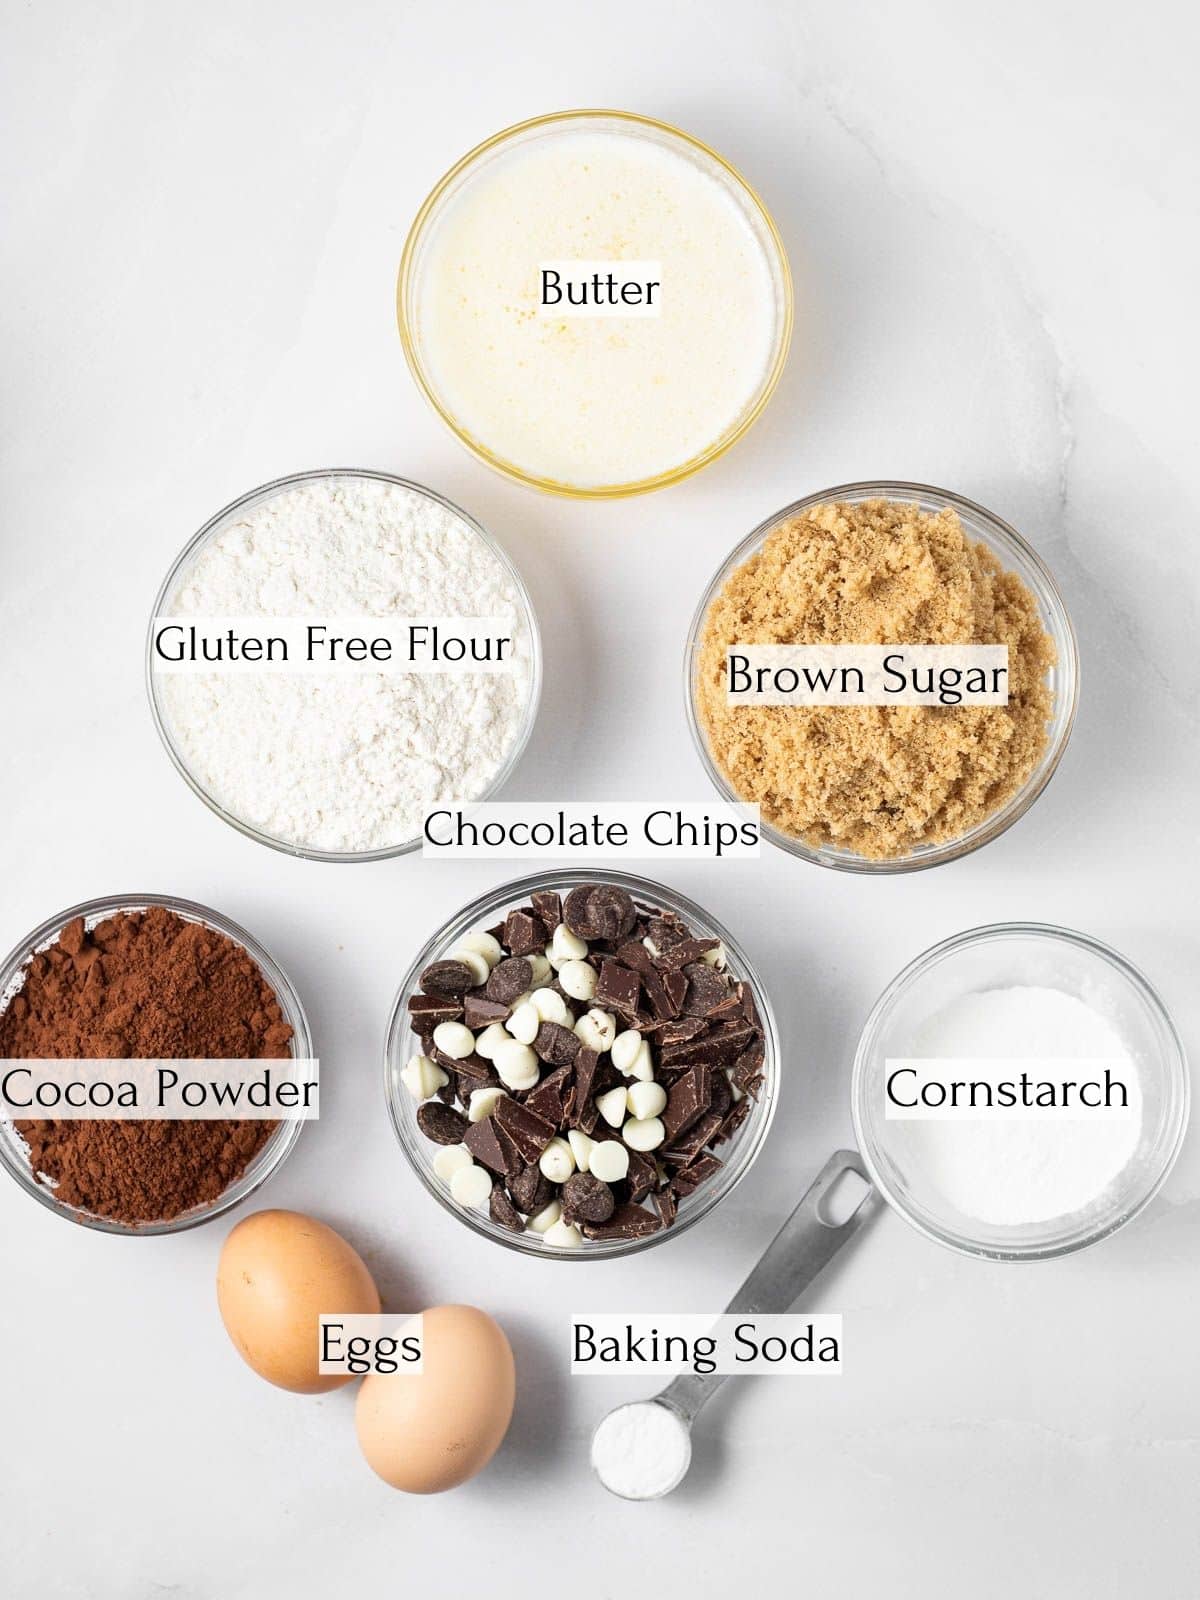 ingredients to make triple chocolate gluten free cookies labeled with white text.